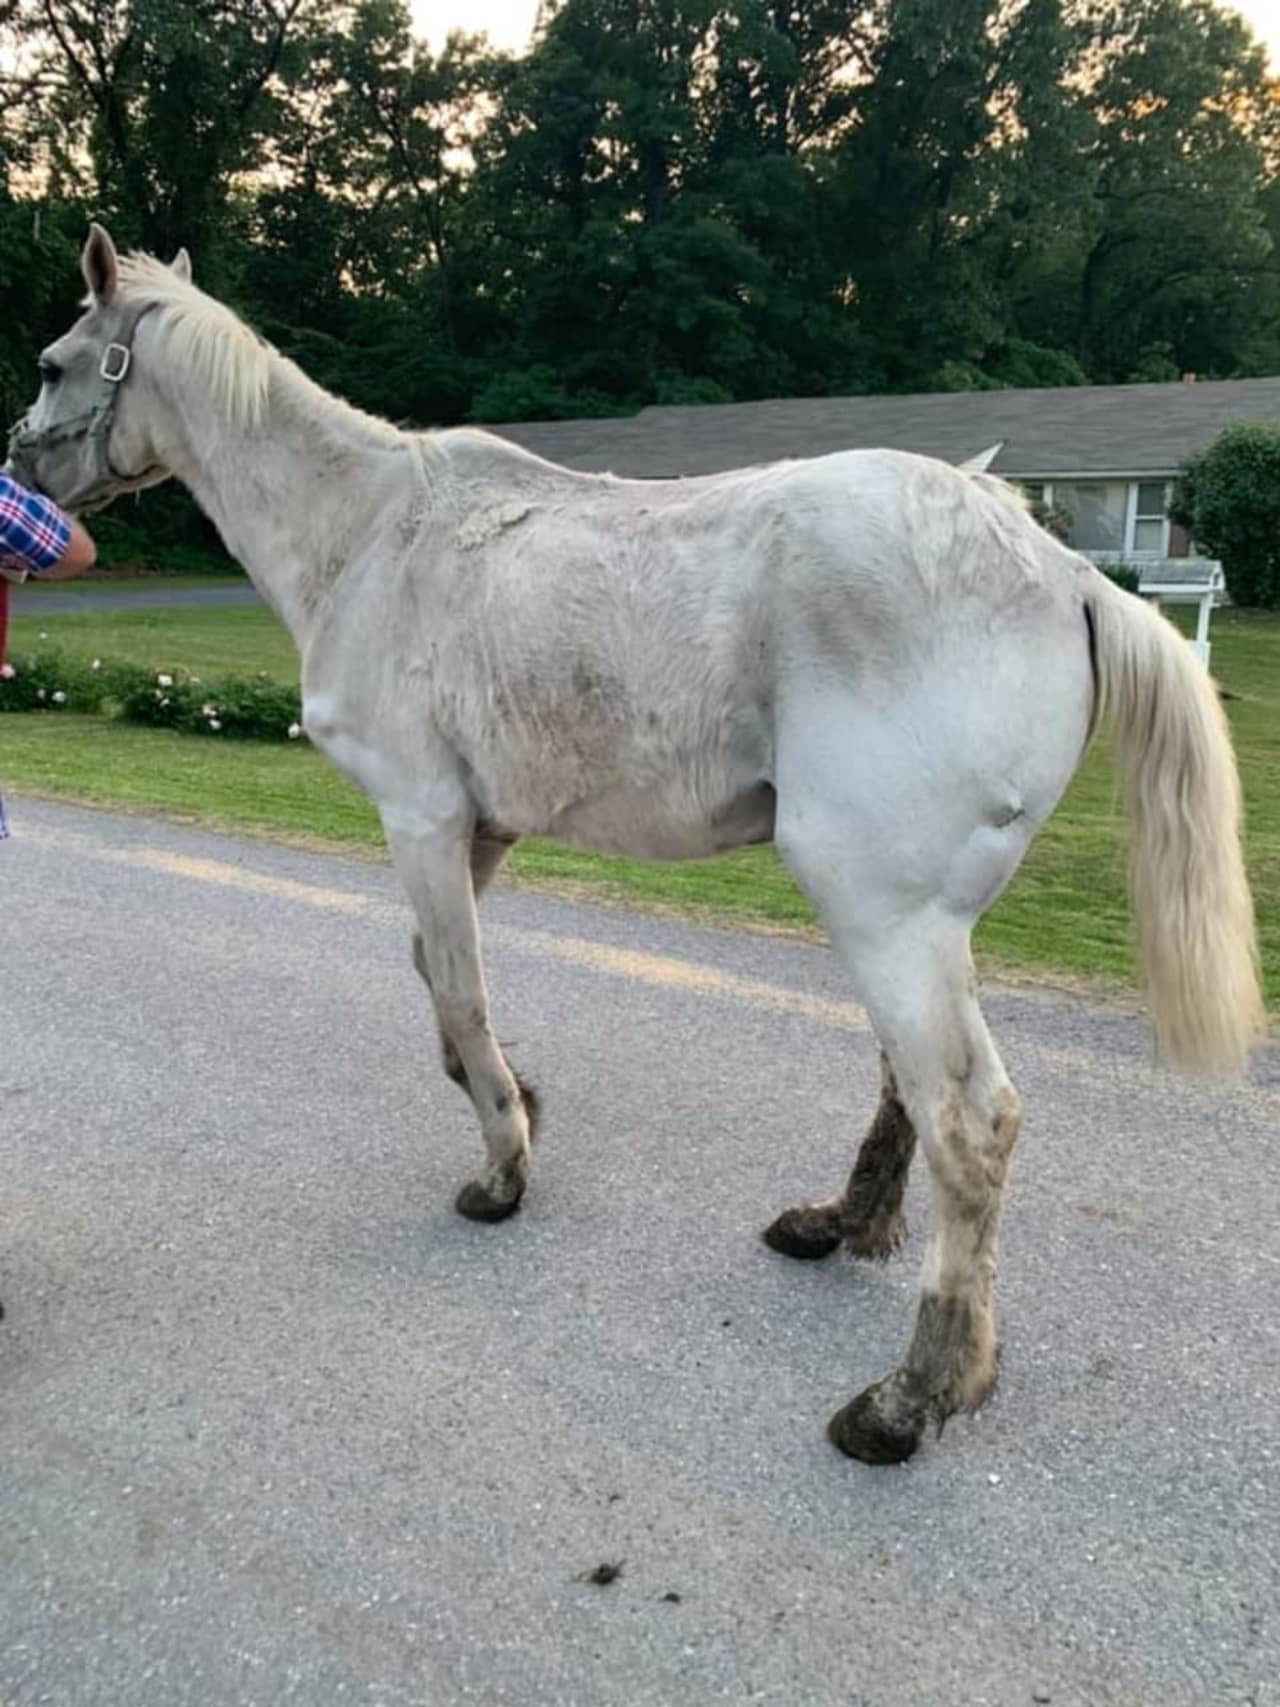 State Police in Carlisle rescued more than 400 animals in “deplorable” conditions over the weekend, leading to felony aggravated animal cruelty charges for a Cumberland County man.